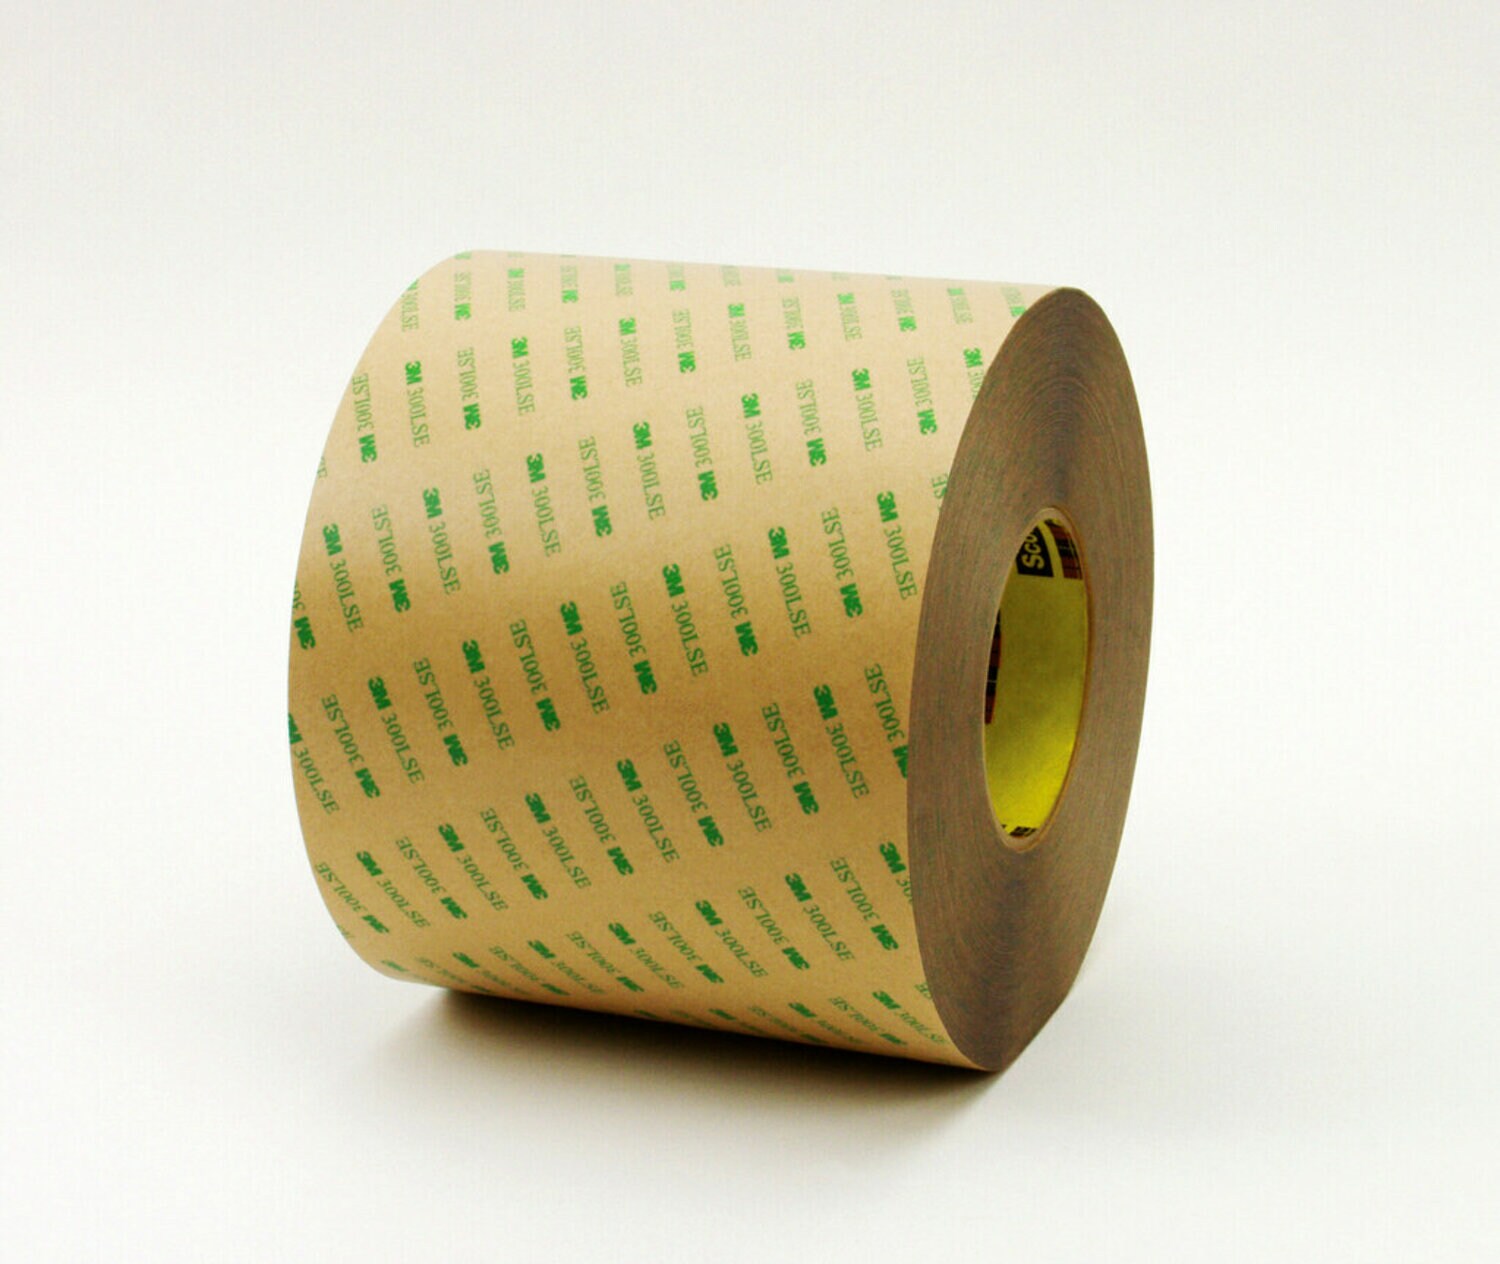 7010375337 - 3M Adhesive Transfer Tape 9672LE, Clear, 18 in x 180 yd, 5 mil, 1 roll
per case